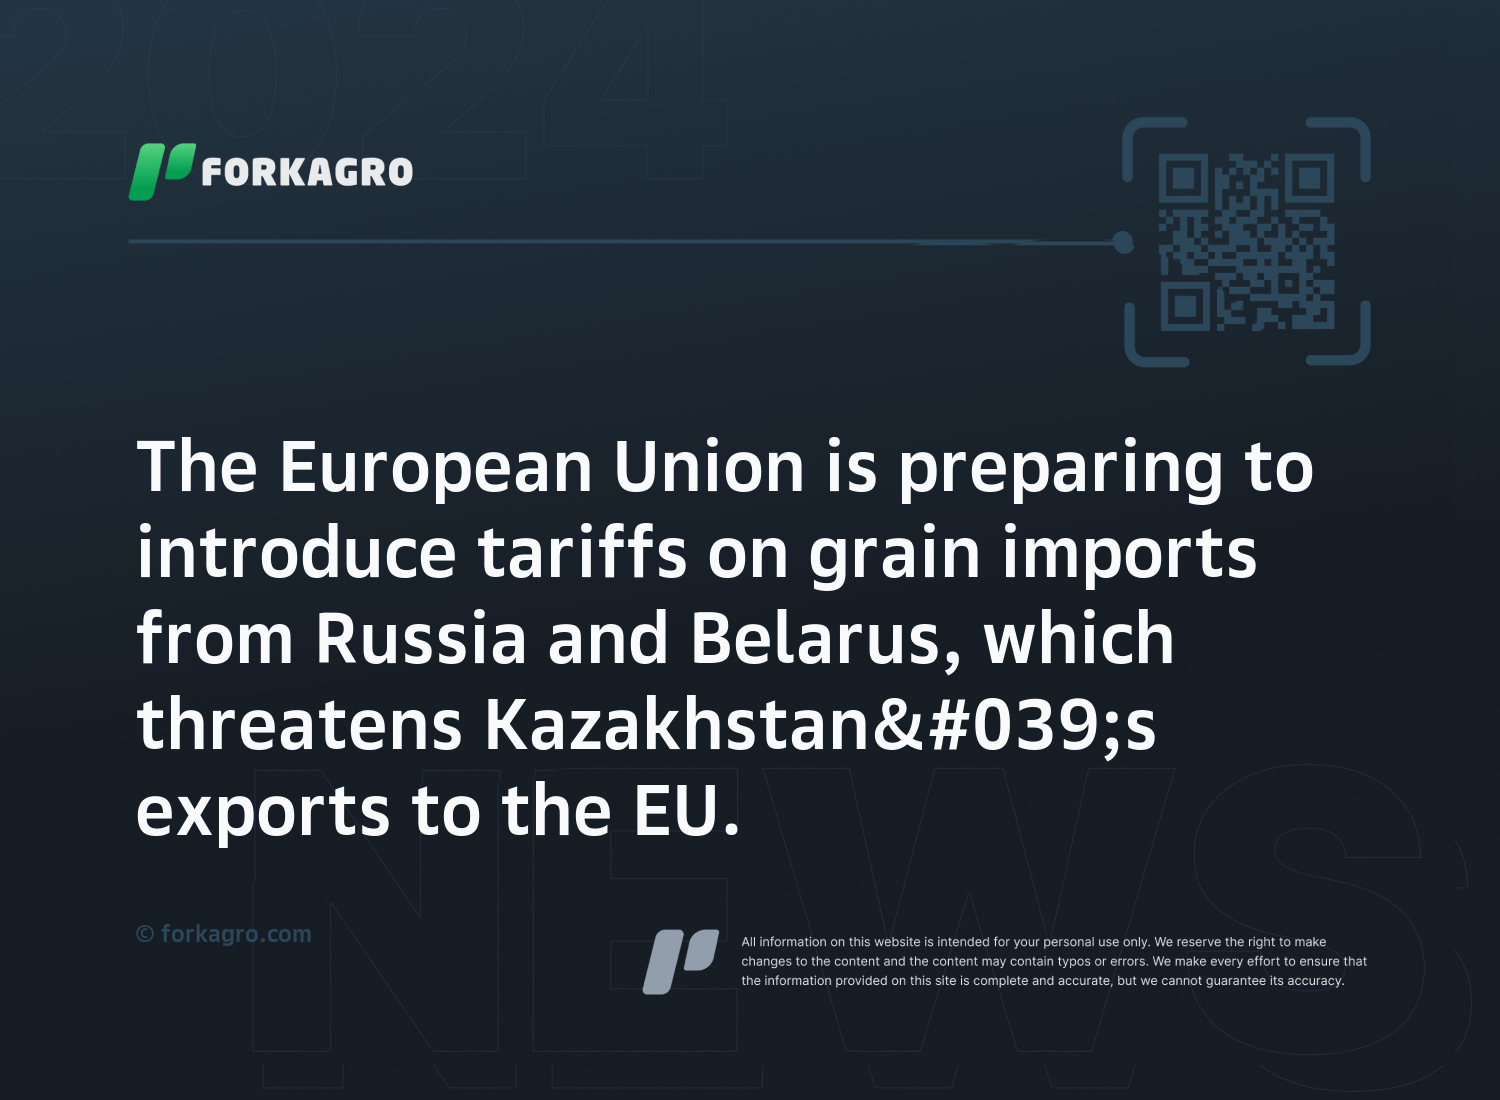 The European Union is preparing to introduce tariffs on grain imports from Russia and Belarus, which threatens Kazakhstan's exports to the EU.